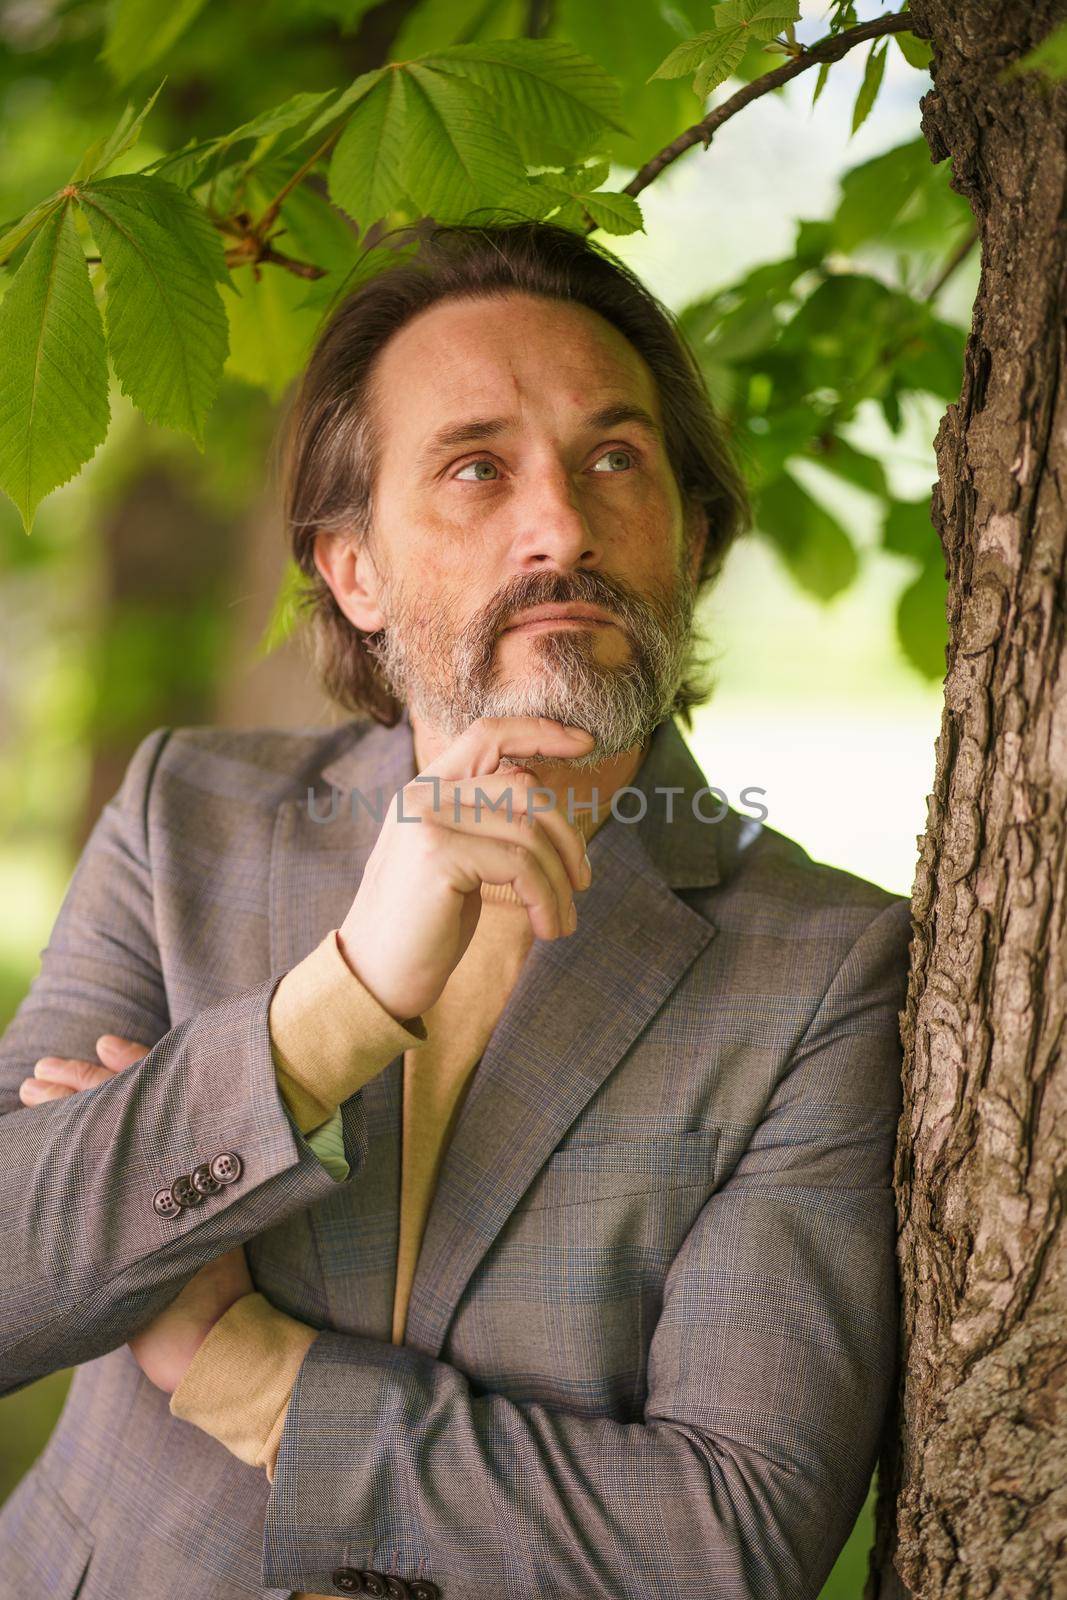 Mature handsome man with grey beard looking up leaning on tree wearing casual grey jacket. Life after 40 years concept, problems and depression. Middle age crisis.